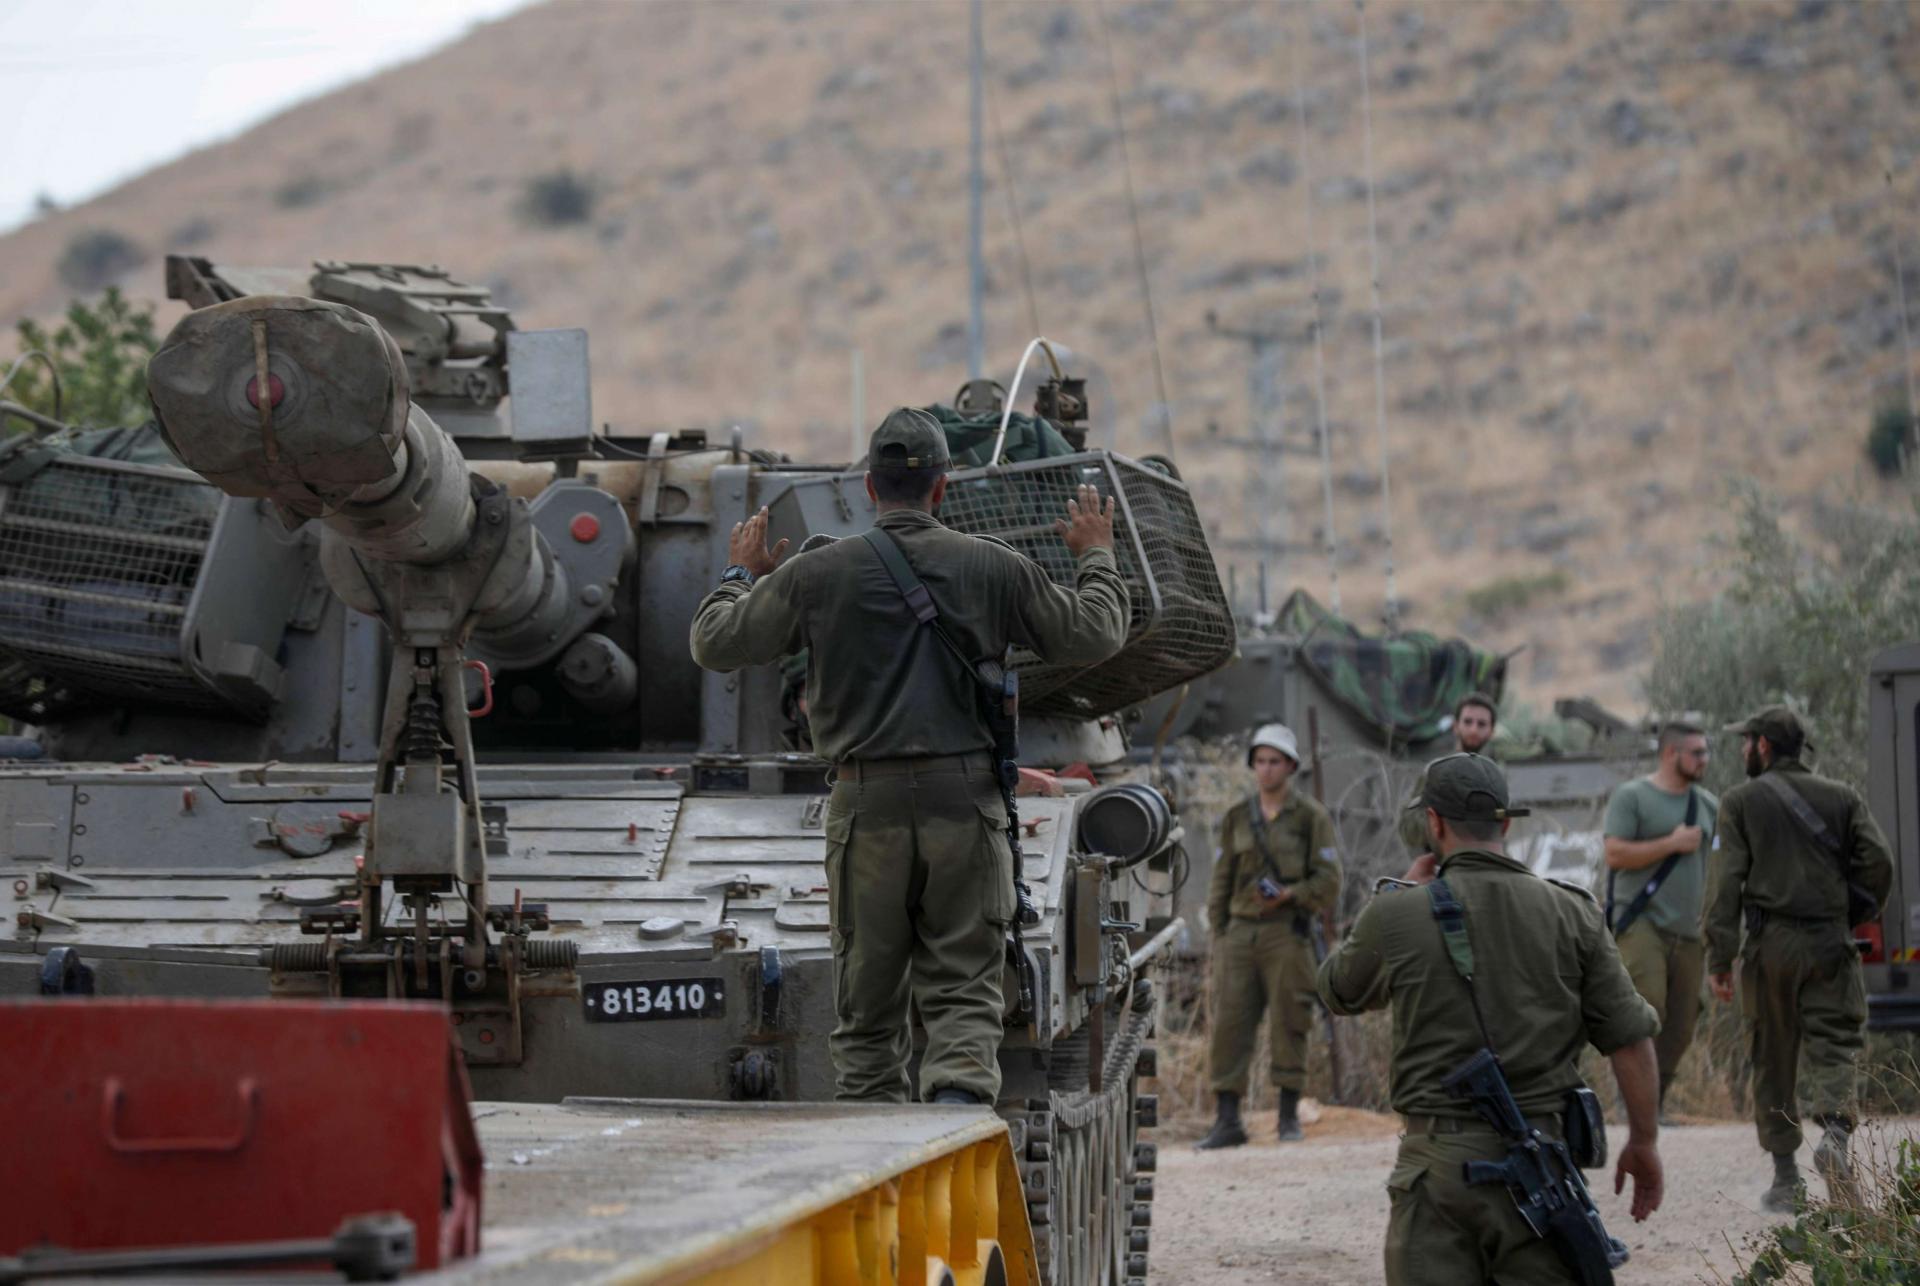 Israel and Hezbollah have fought several wars, the last of which was a 33-day conflict in 2006